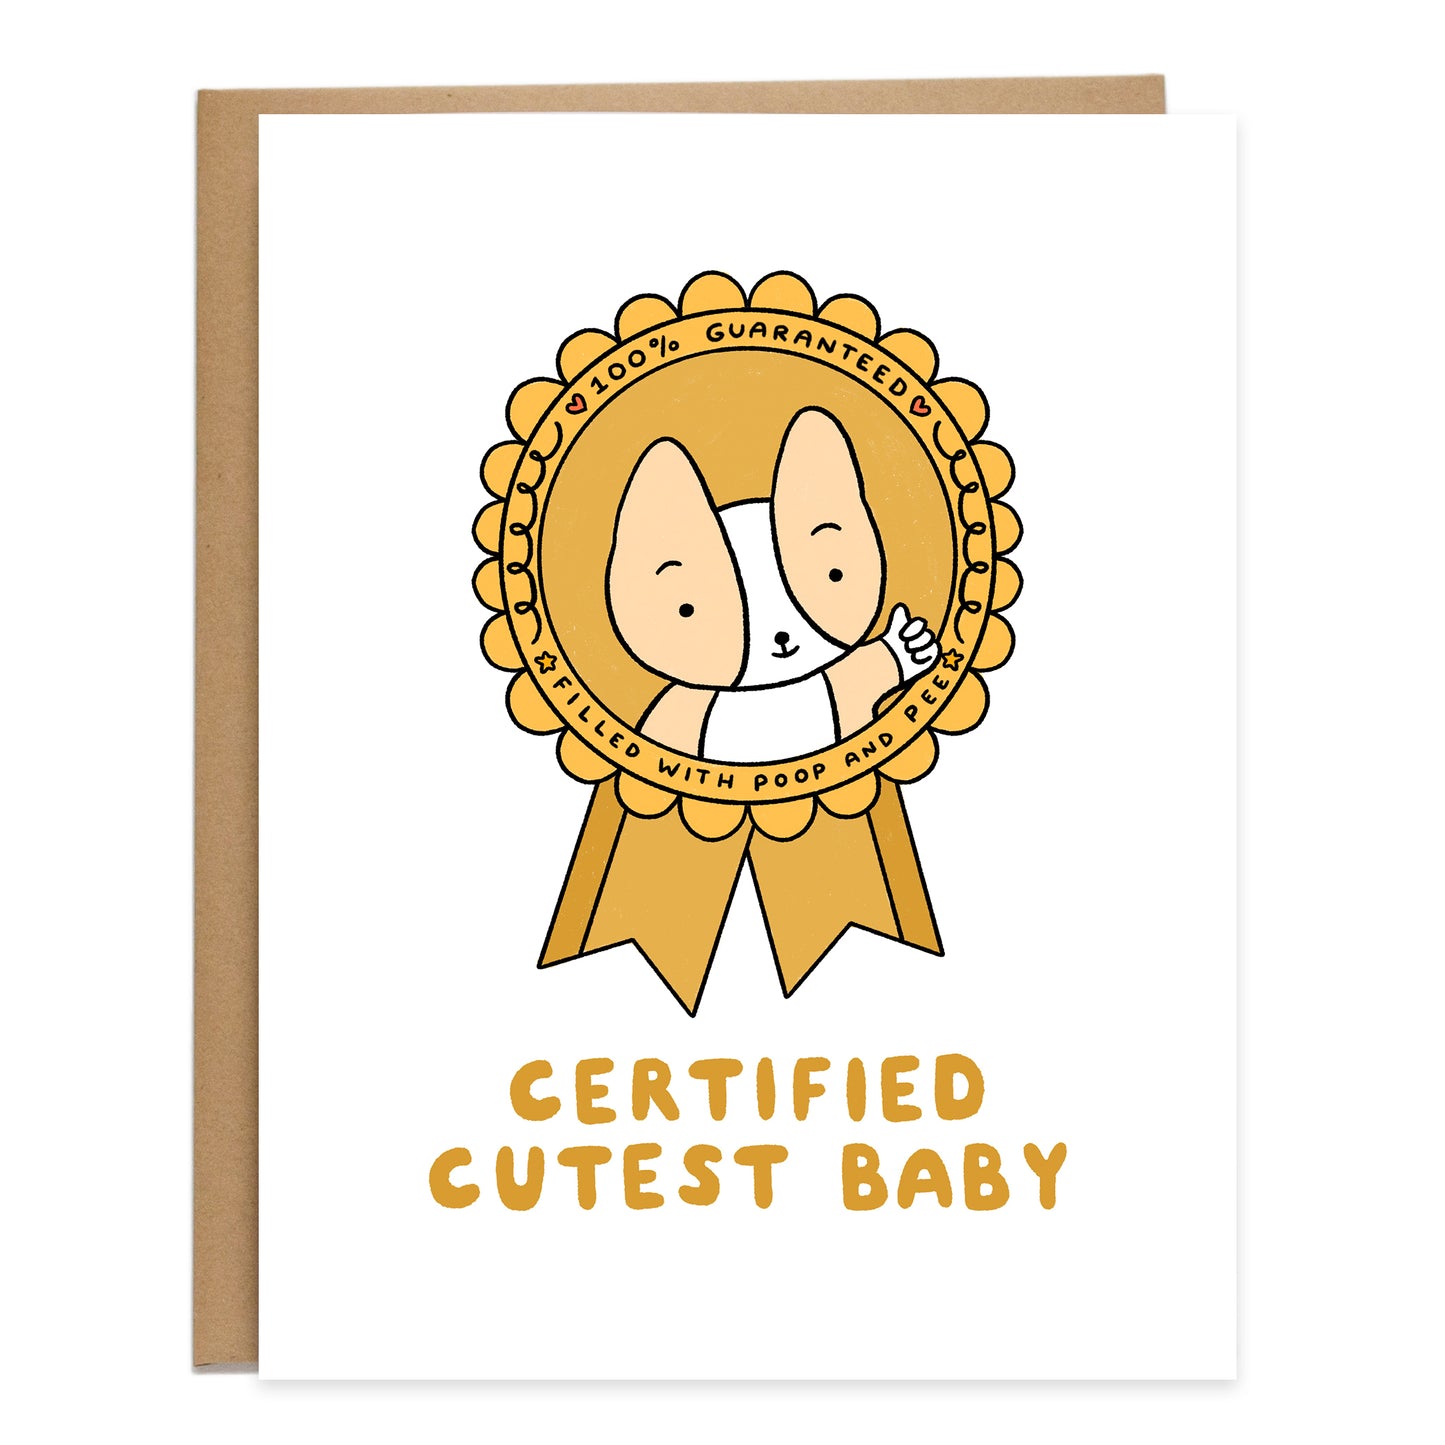 A drawing of a gold award ribbon with a baby corgi in the center giving a thumbs up. The text around the ribbon reads: 100% Guaranteed, filled with poop and pee. Card reads, certified cutest baby, in yellow handwriting